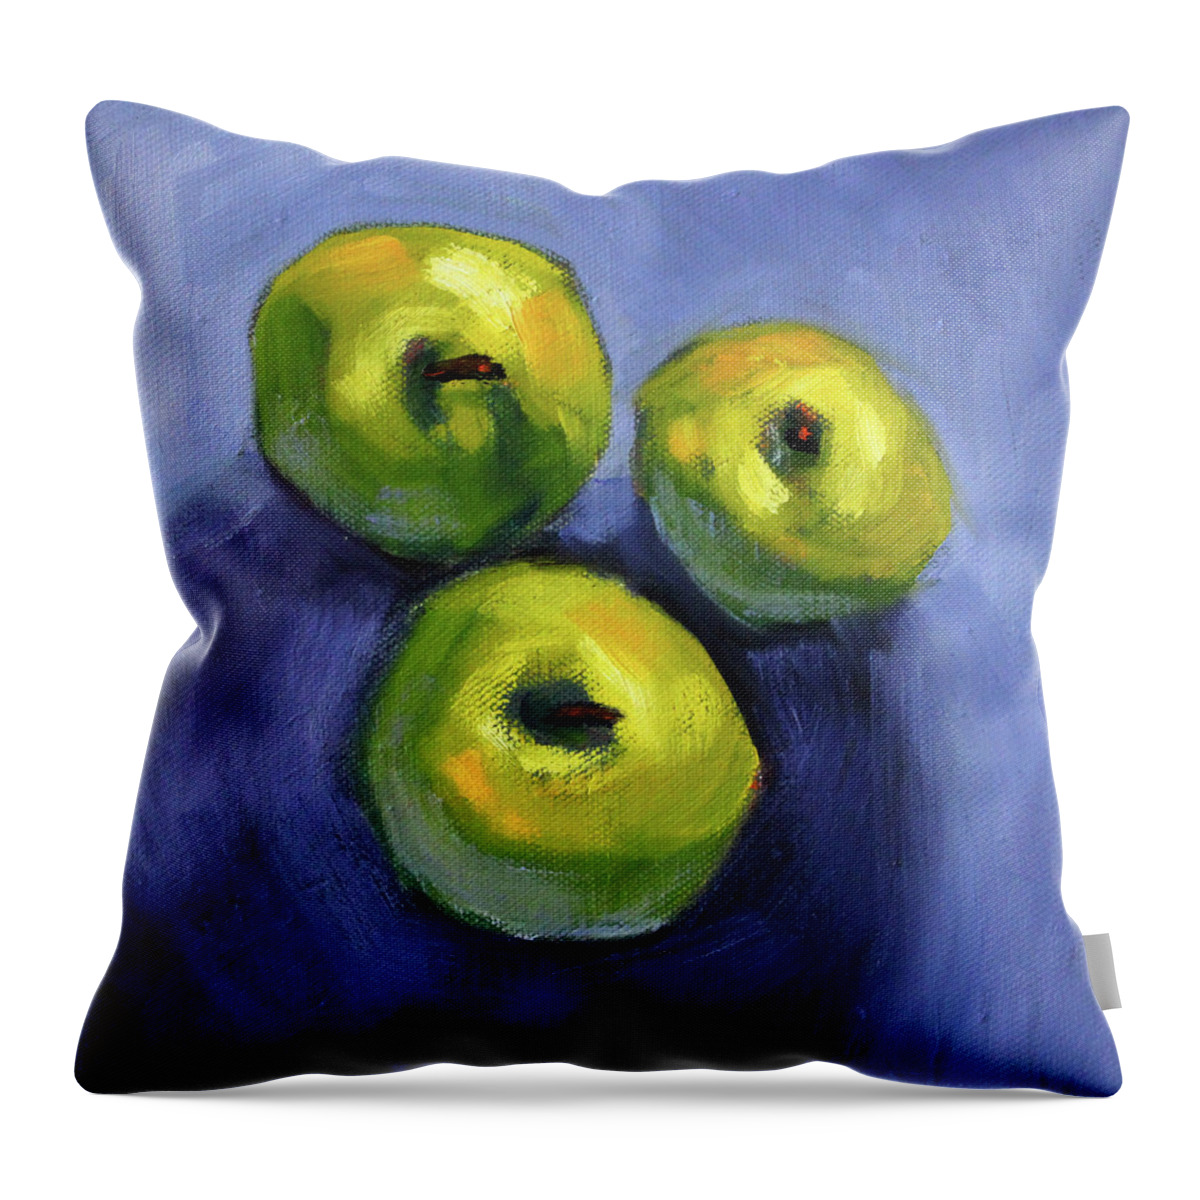 Kitchen Still Life Throw Pillow featuring the painting Kitchen Pears Still Life by Nancy Merkle